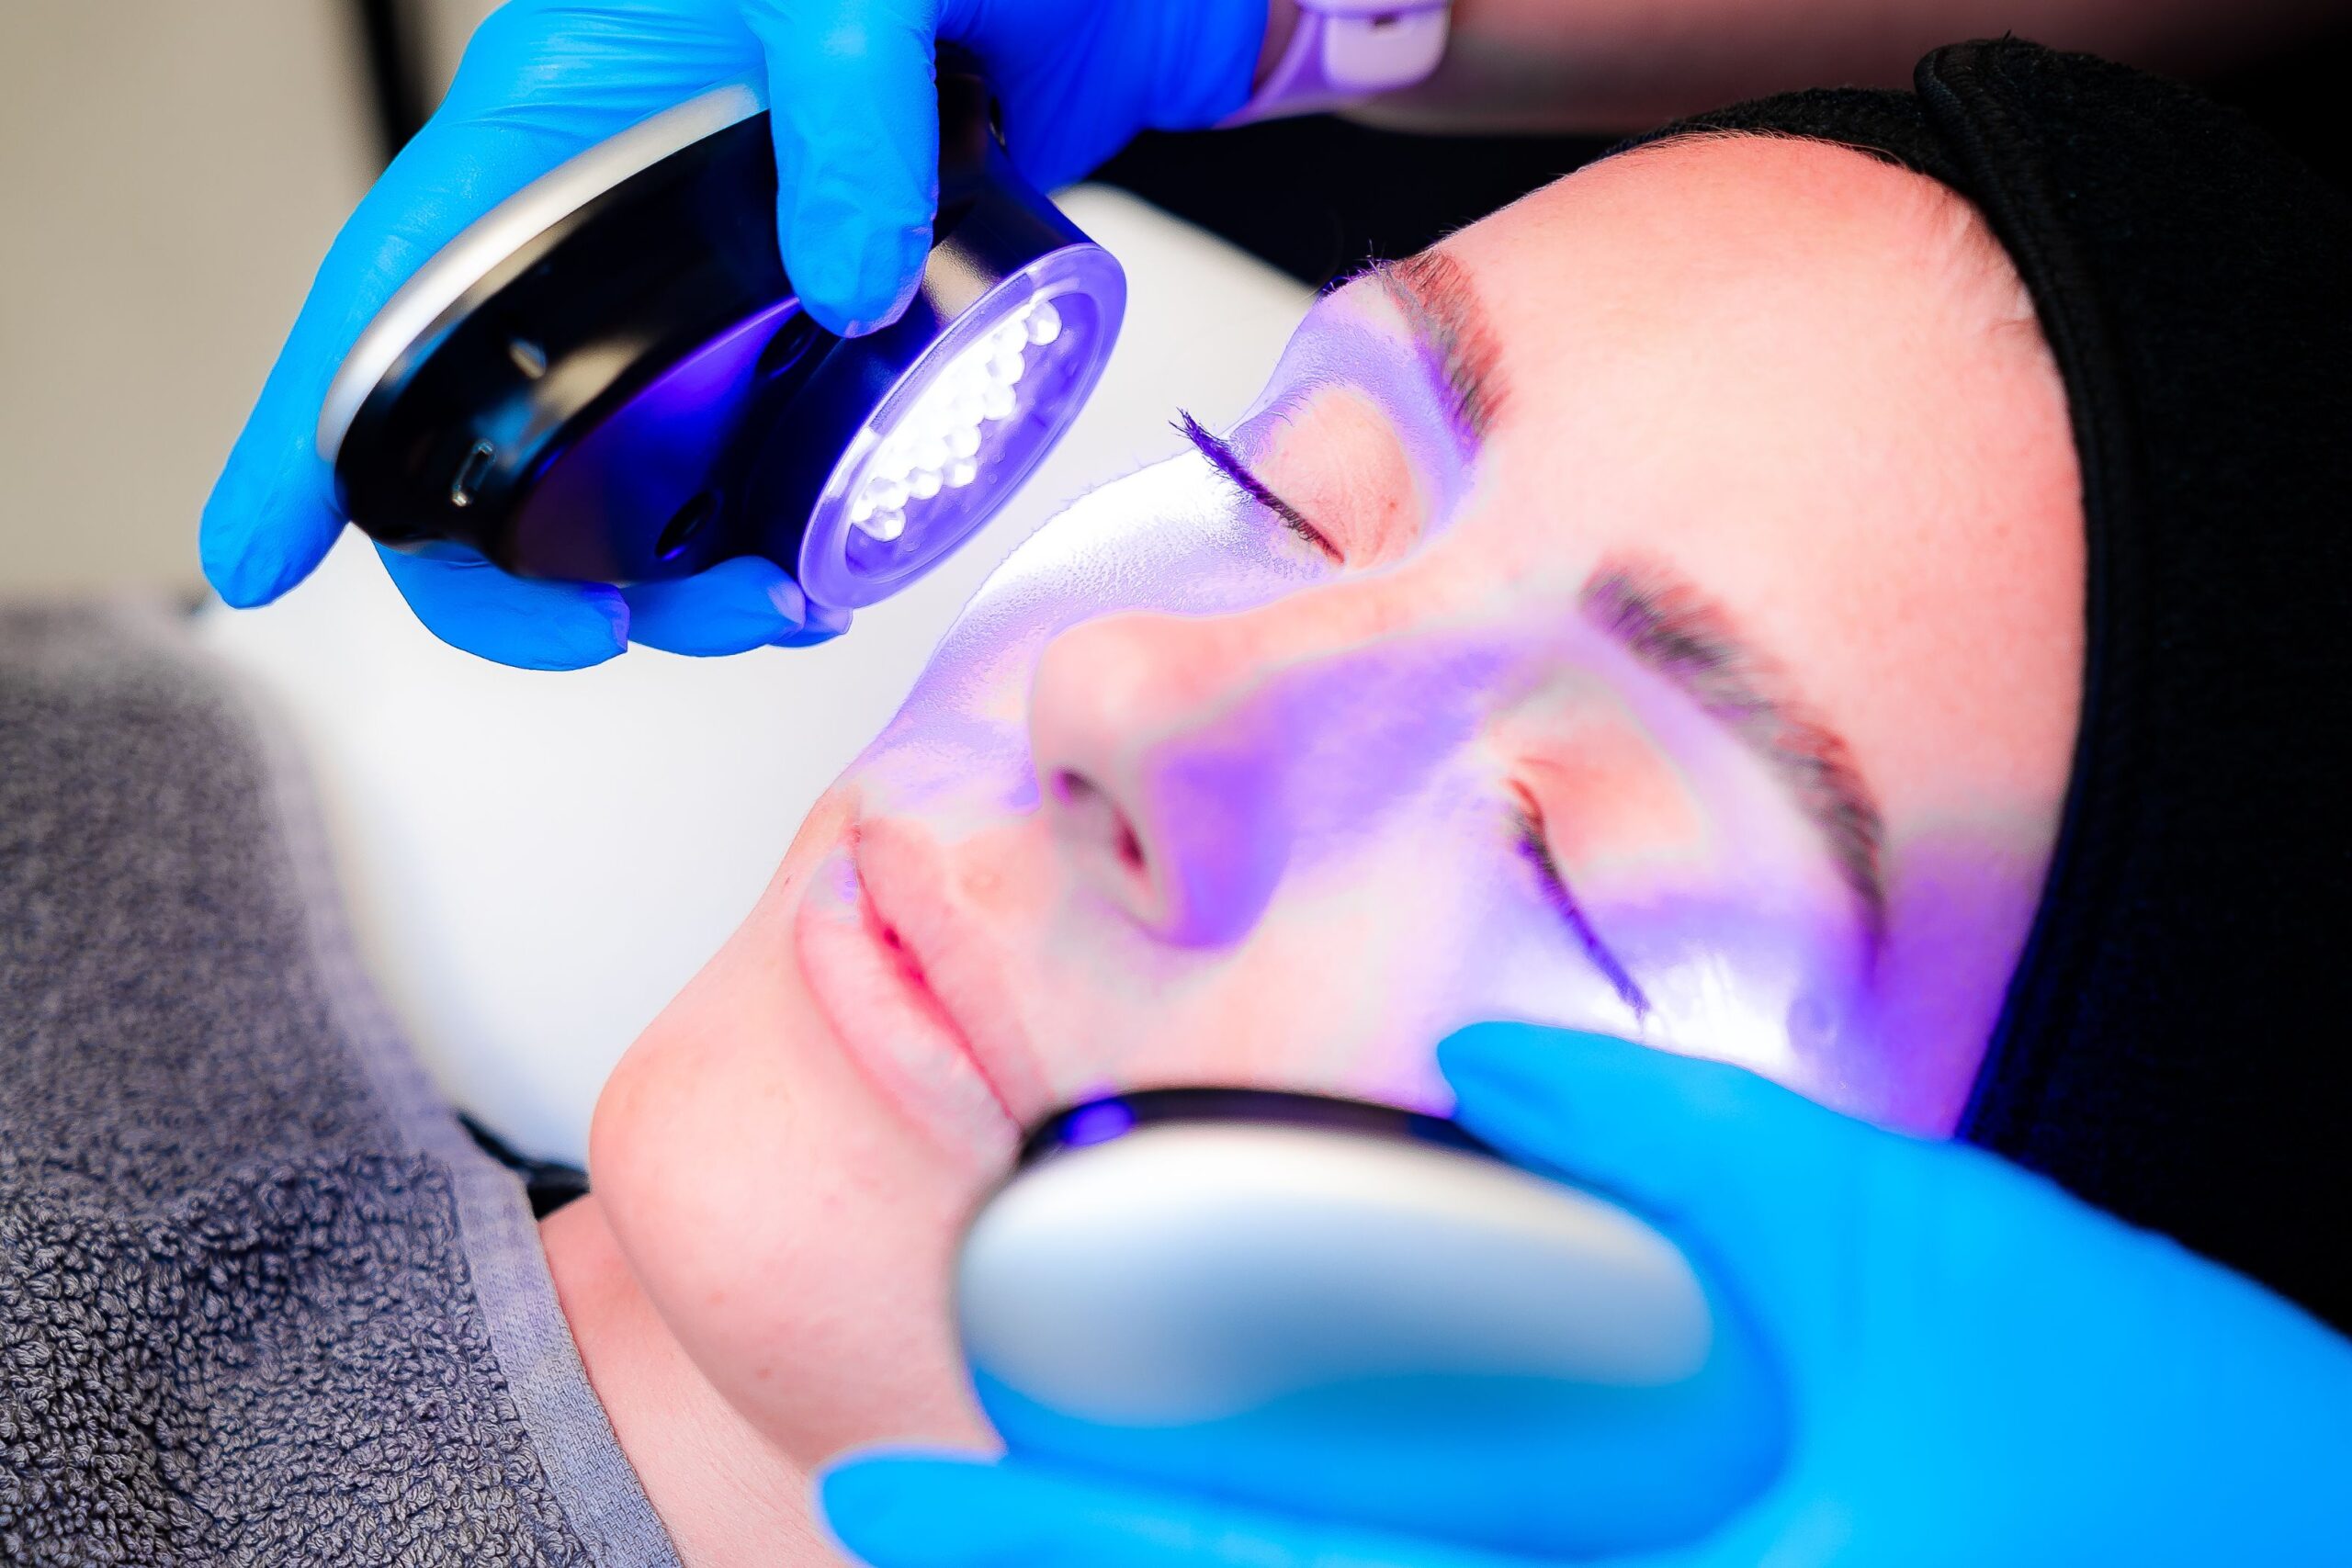 Photofacial for Acne at Freyja Medical in Wrexham, Nantwich and Cheshire